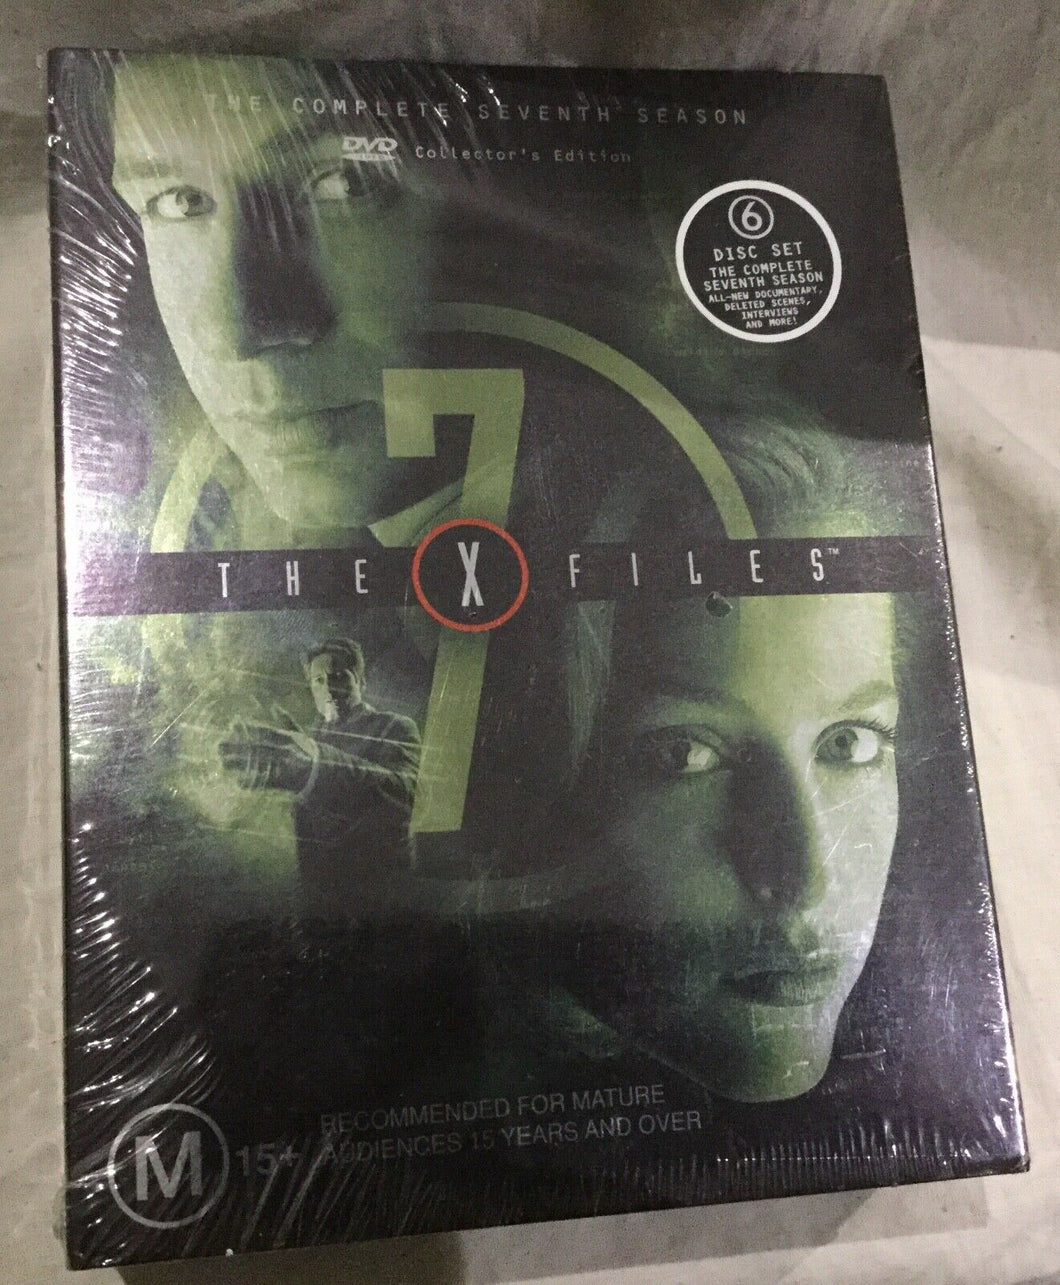 THE X FILES - COMPLETE 7TH SEVENTH SEASON DVD - NEW (SEALED)